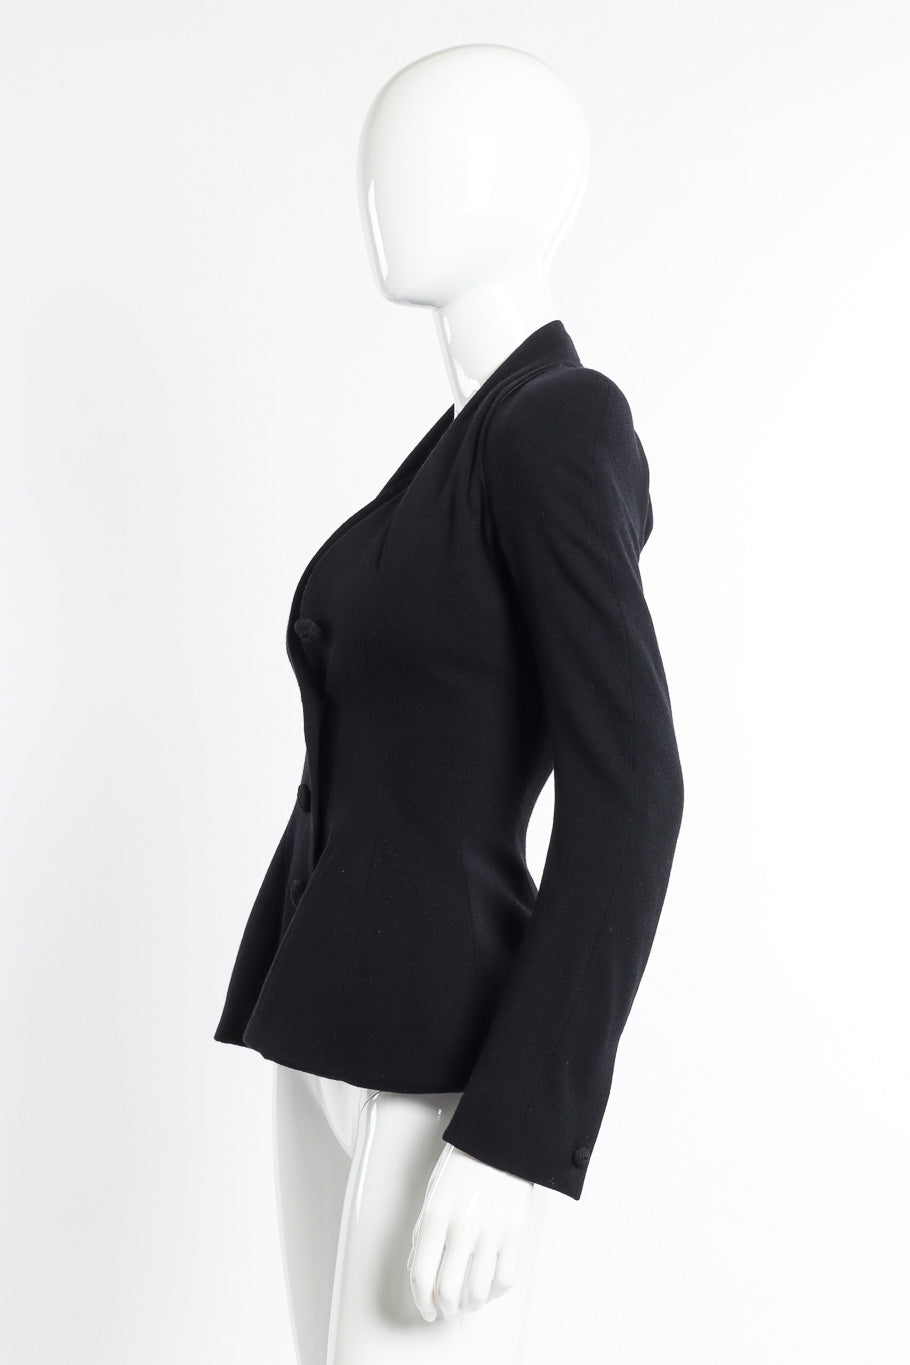 1995 F/W Dolores Tailored Jacket by John Galliano on mannequin side @recessla